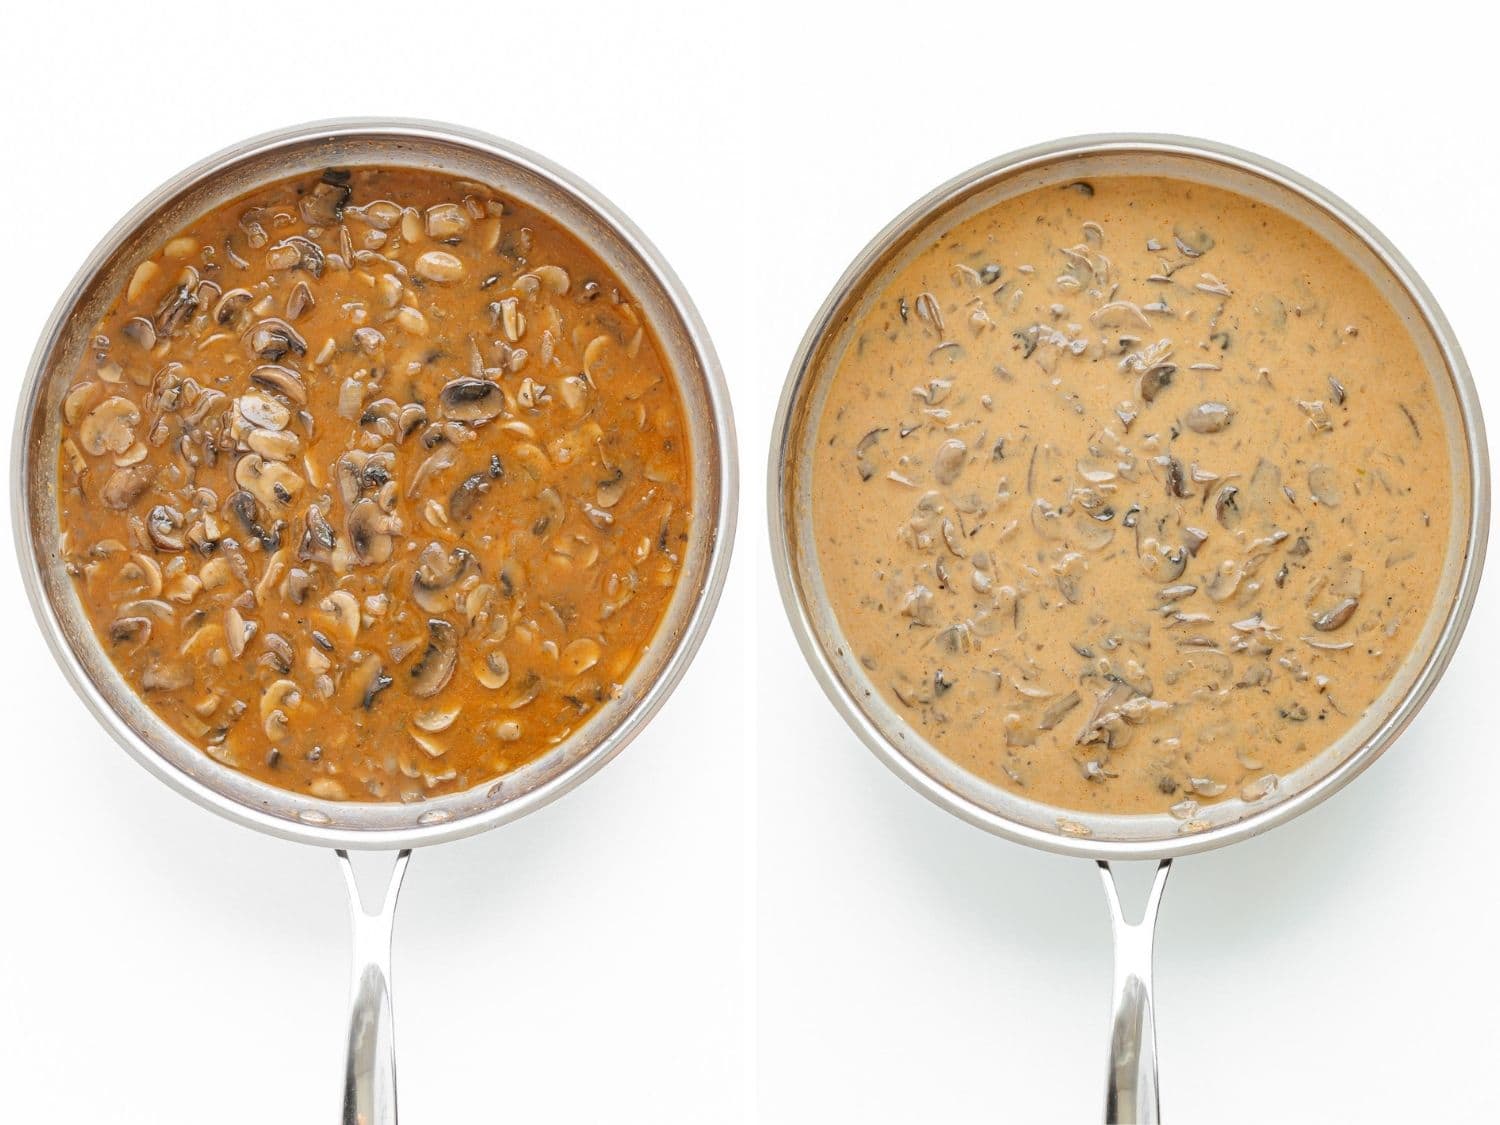 Photo collage of Stroganoff sauce in a stainless steel skillet before and after adding in sour cream.